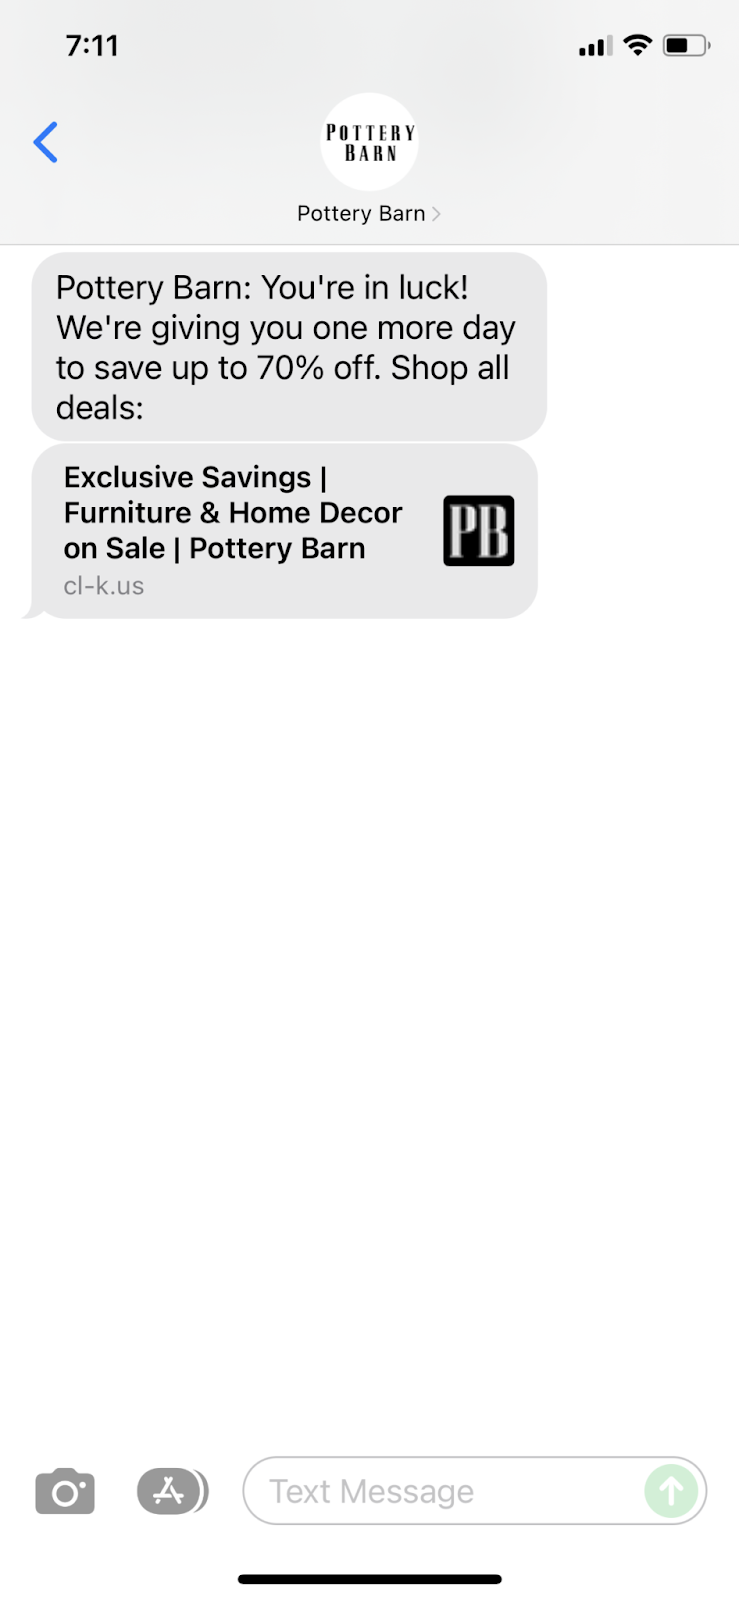 A promotional SMS message from Pottery Barn